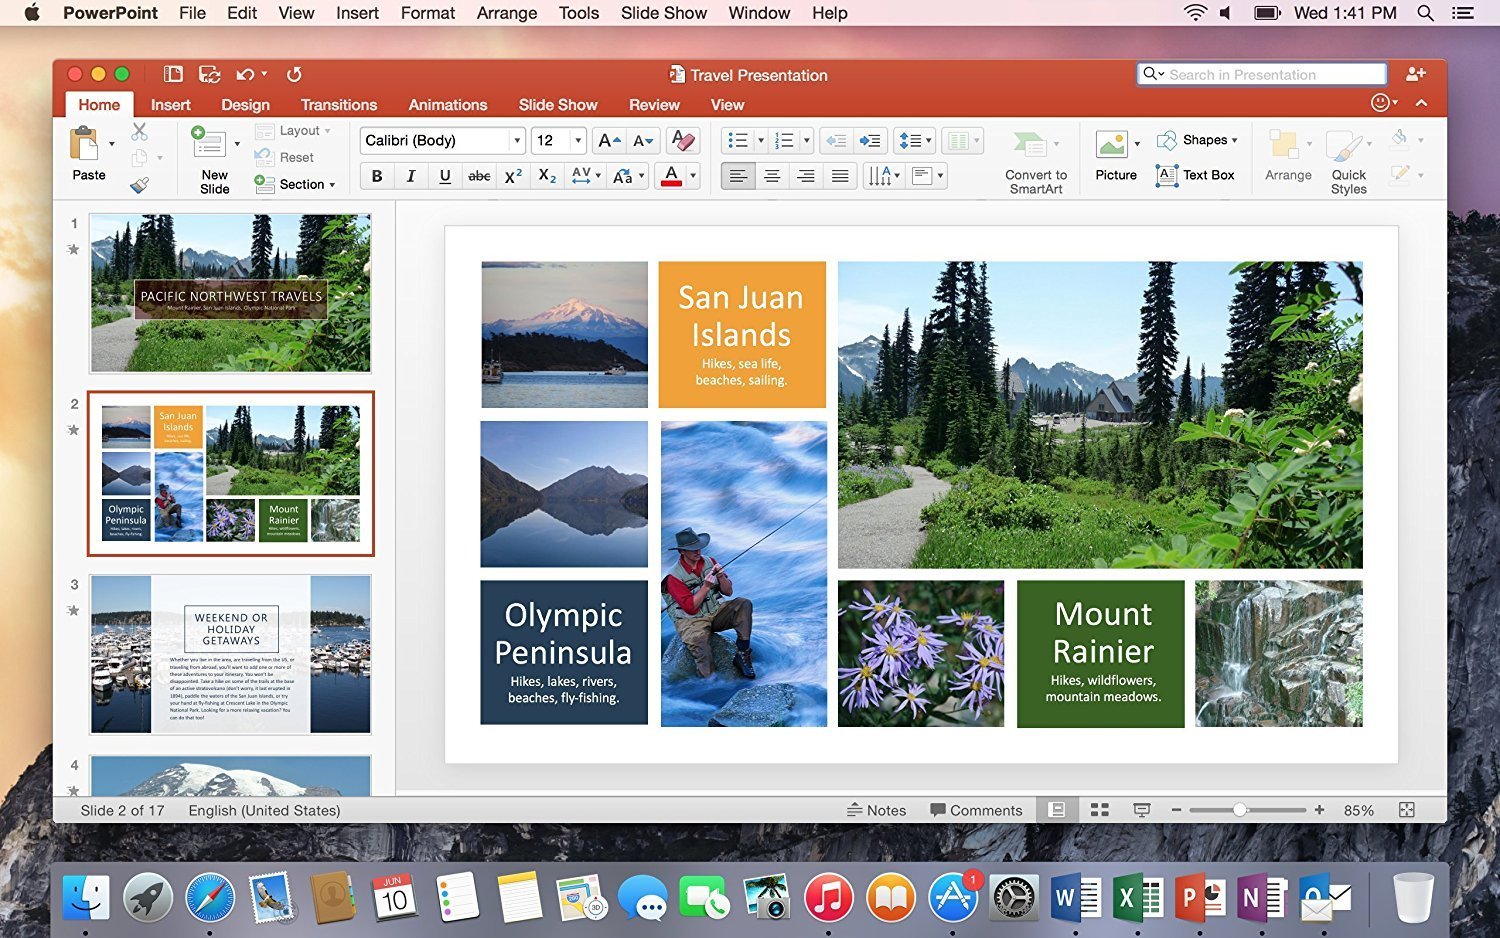 Office Home and Business 2016 for Mac | 1 user, Mac Key Card